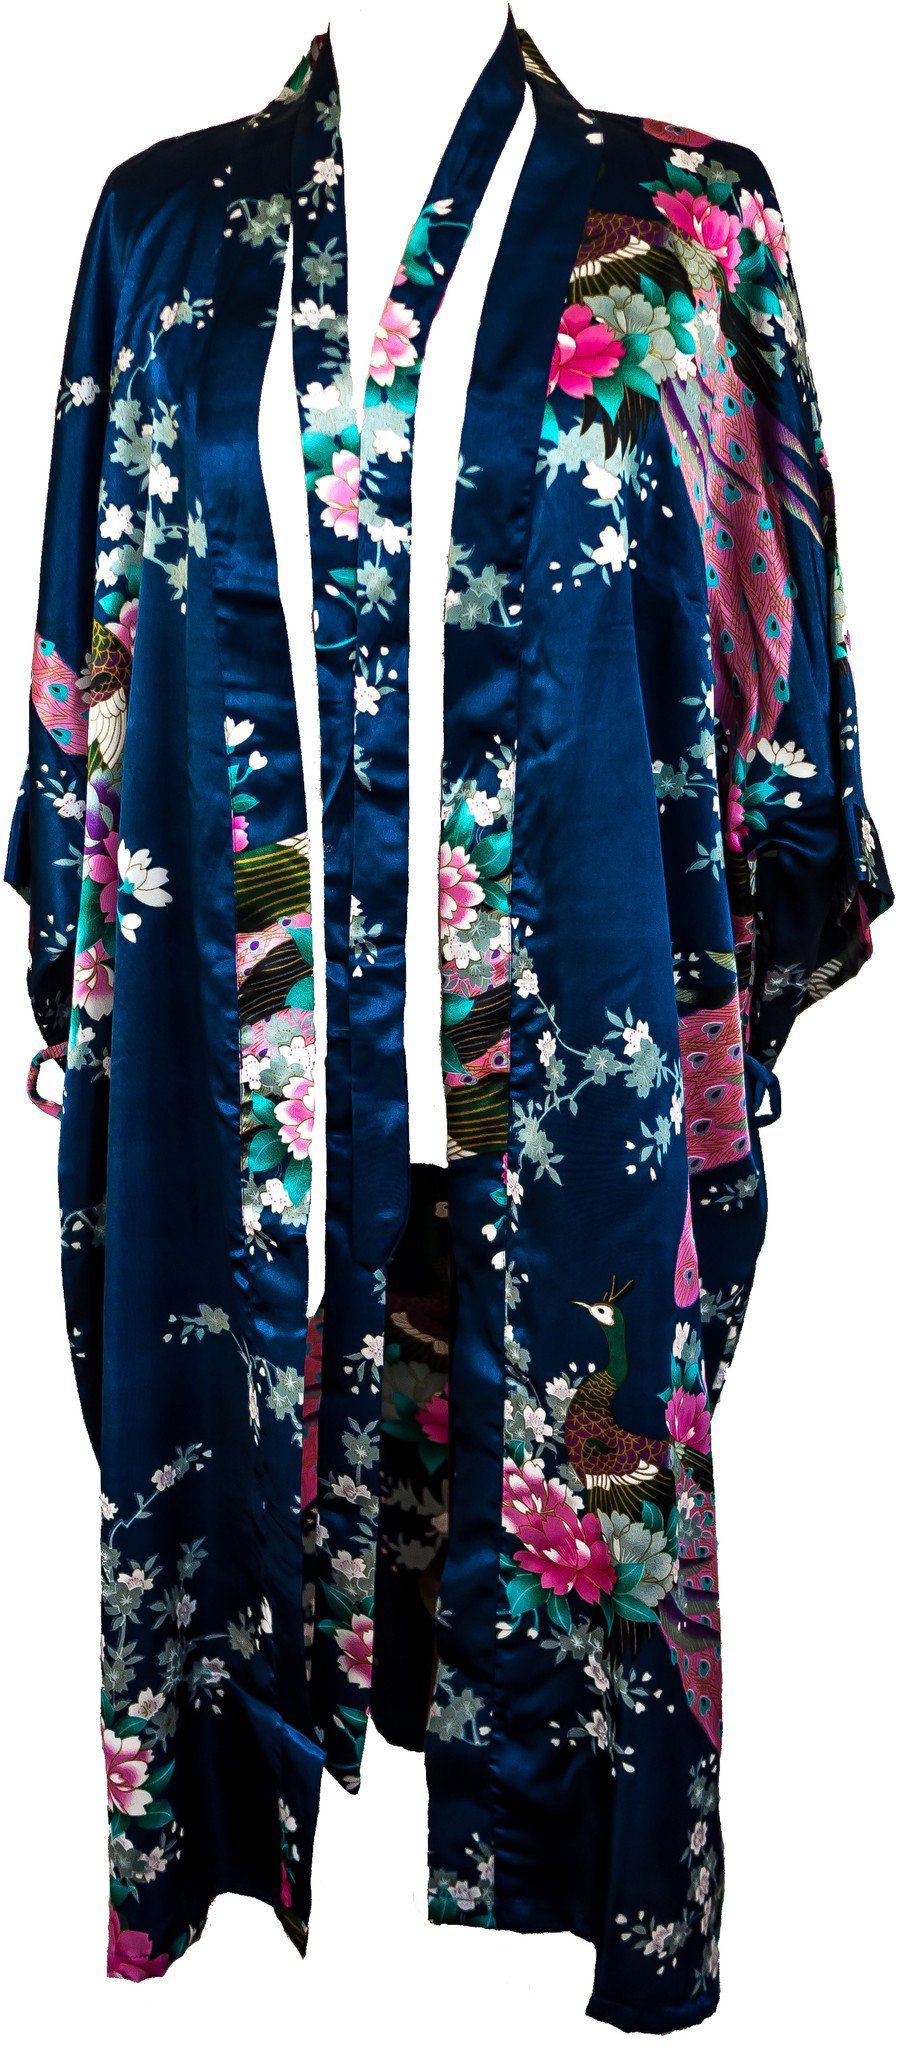 Kimono Robe Peacock - Lightweight Women's Robe | Indulge in Affordable Luxury - CCCollections